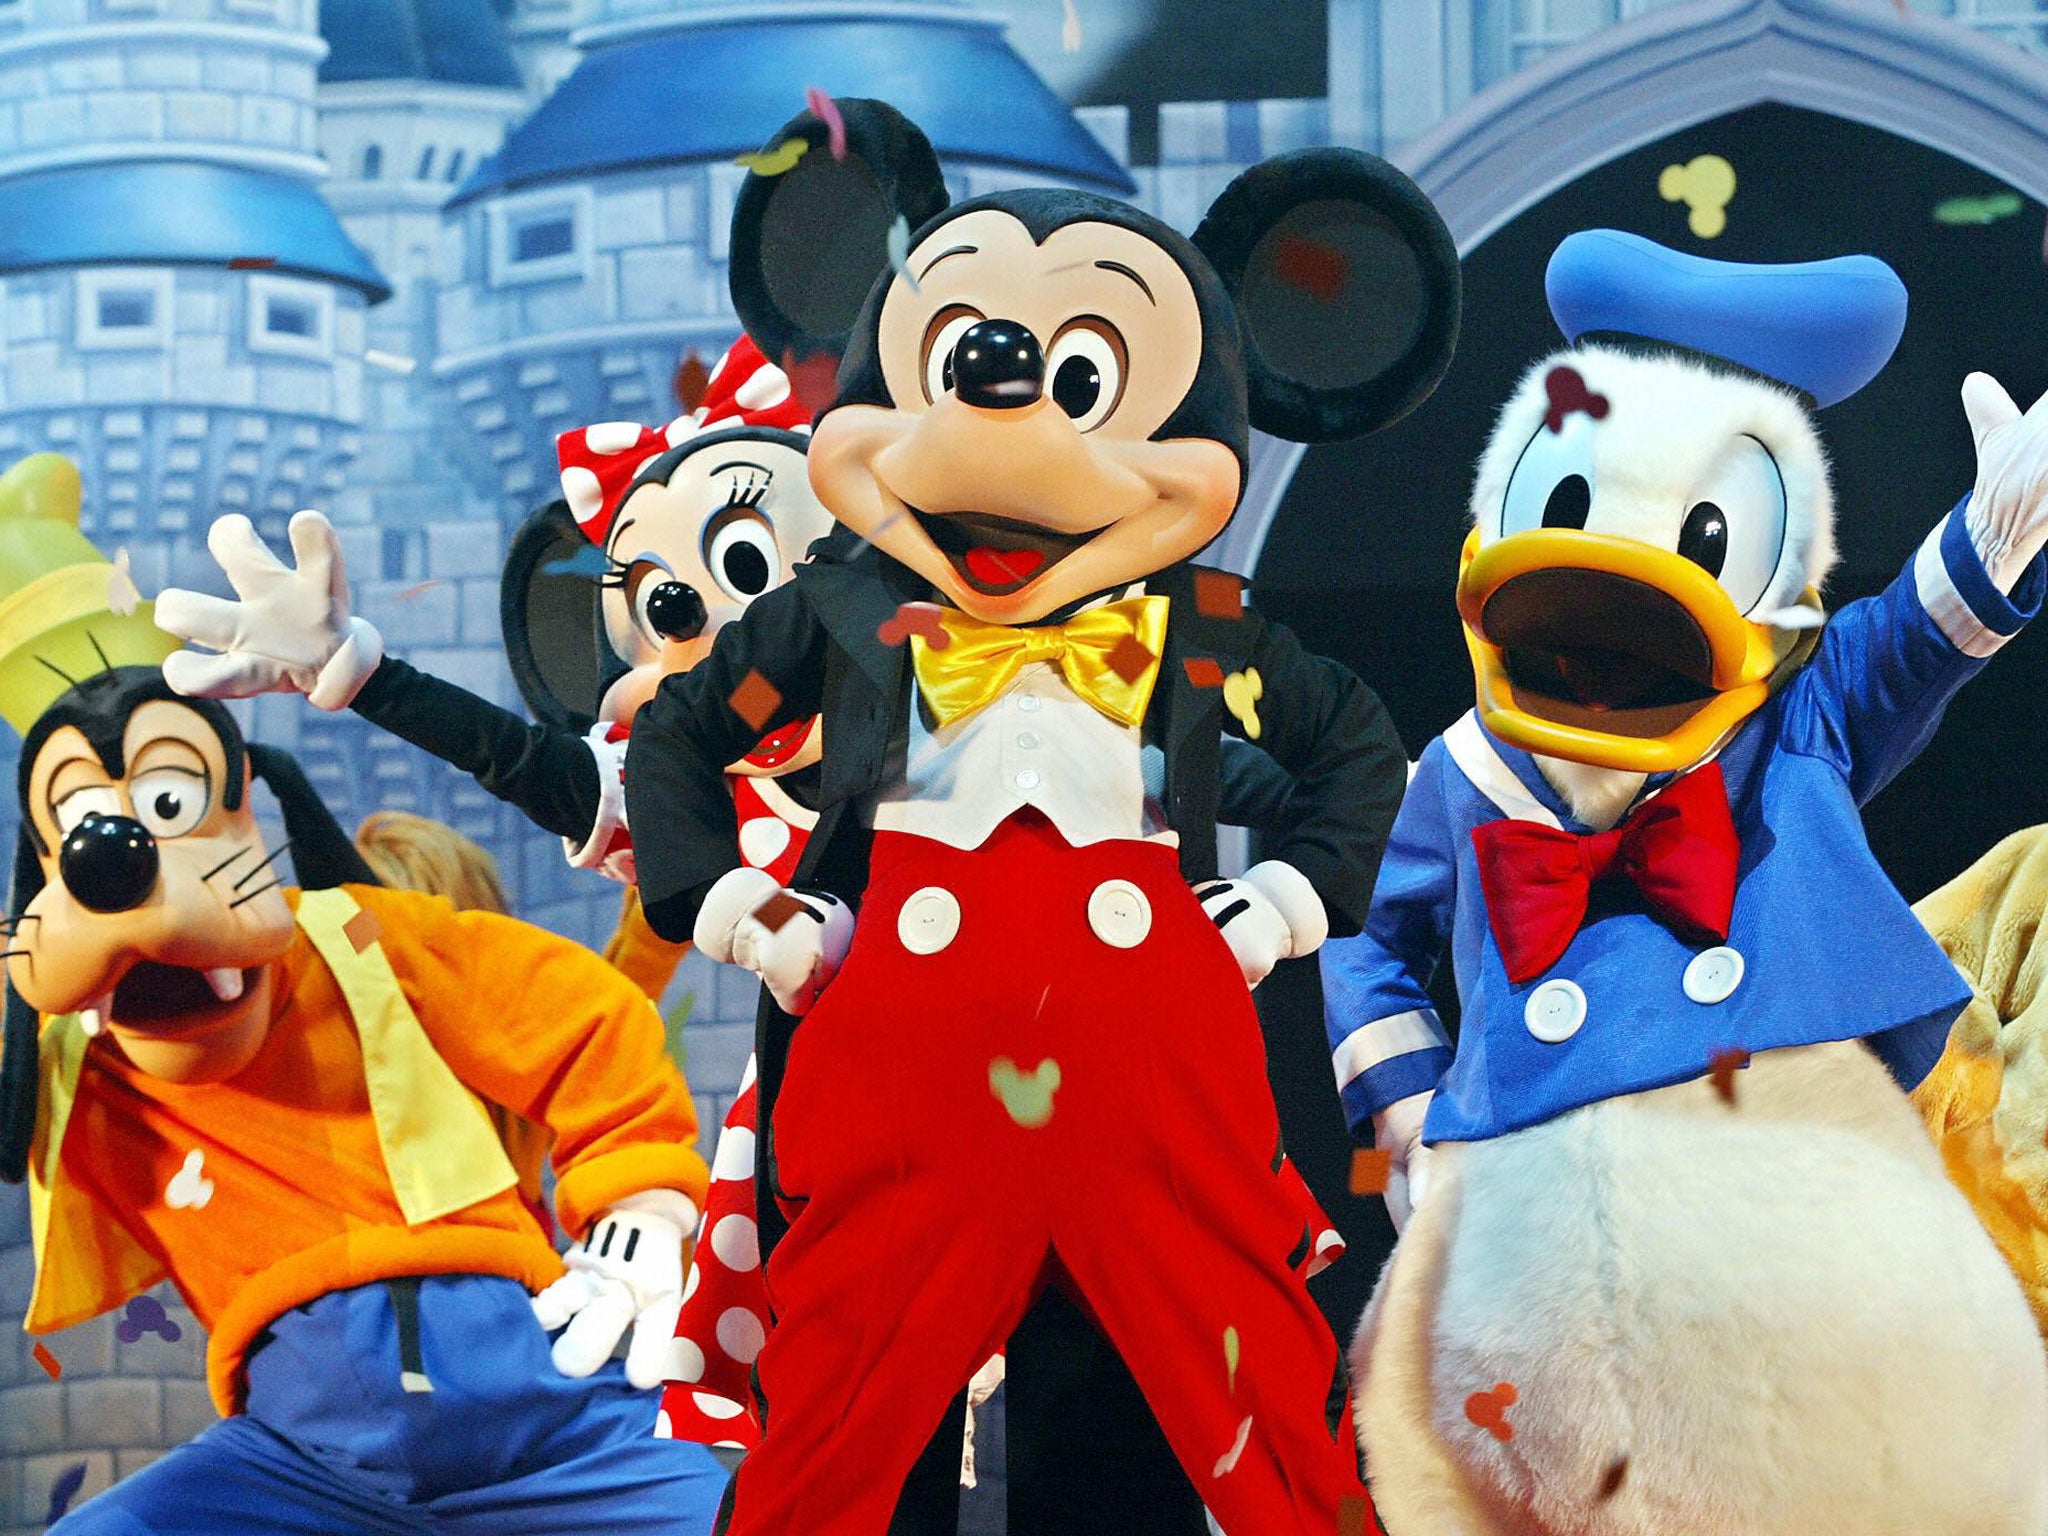 Mickey Mouse (C) and other Walt Disney characters perform at Disneyland, where a mother took a trip using money she allegedly raised by pretending her son had cancer.